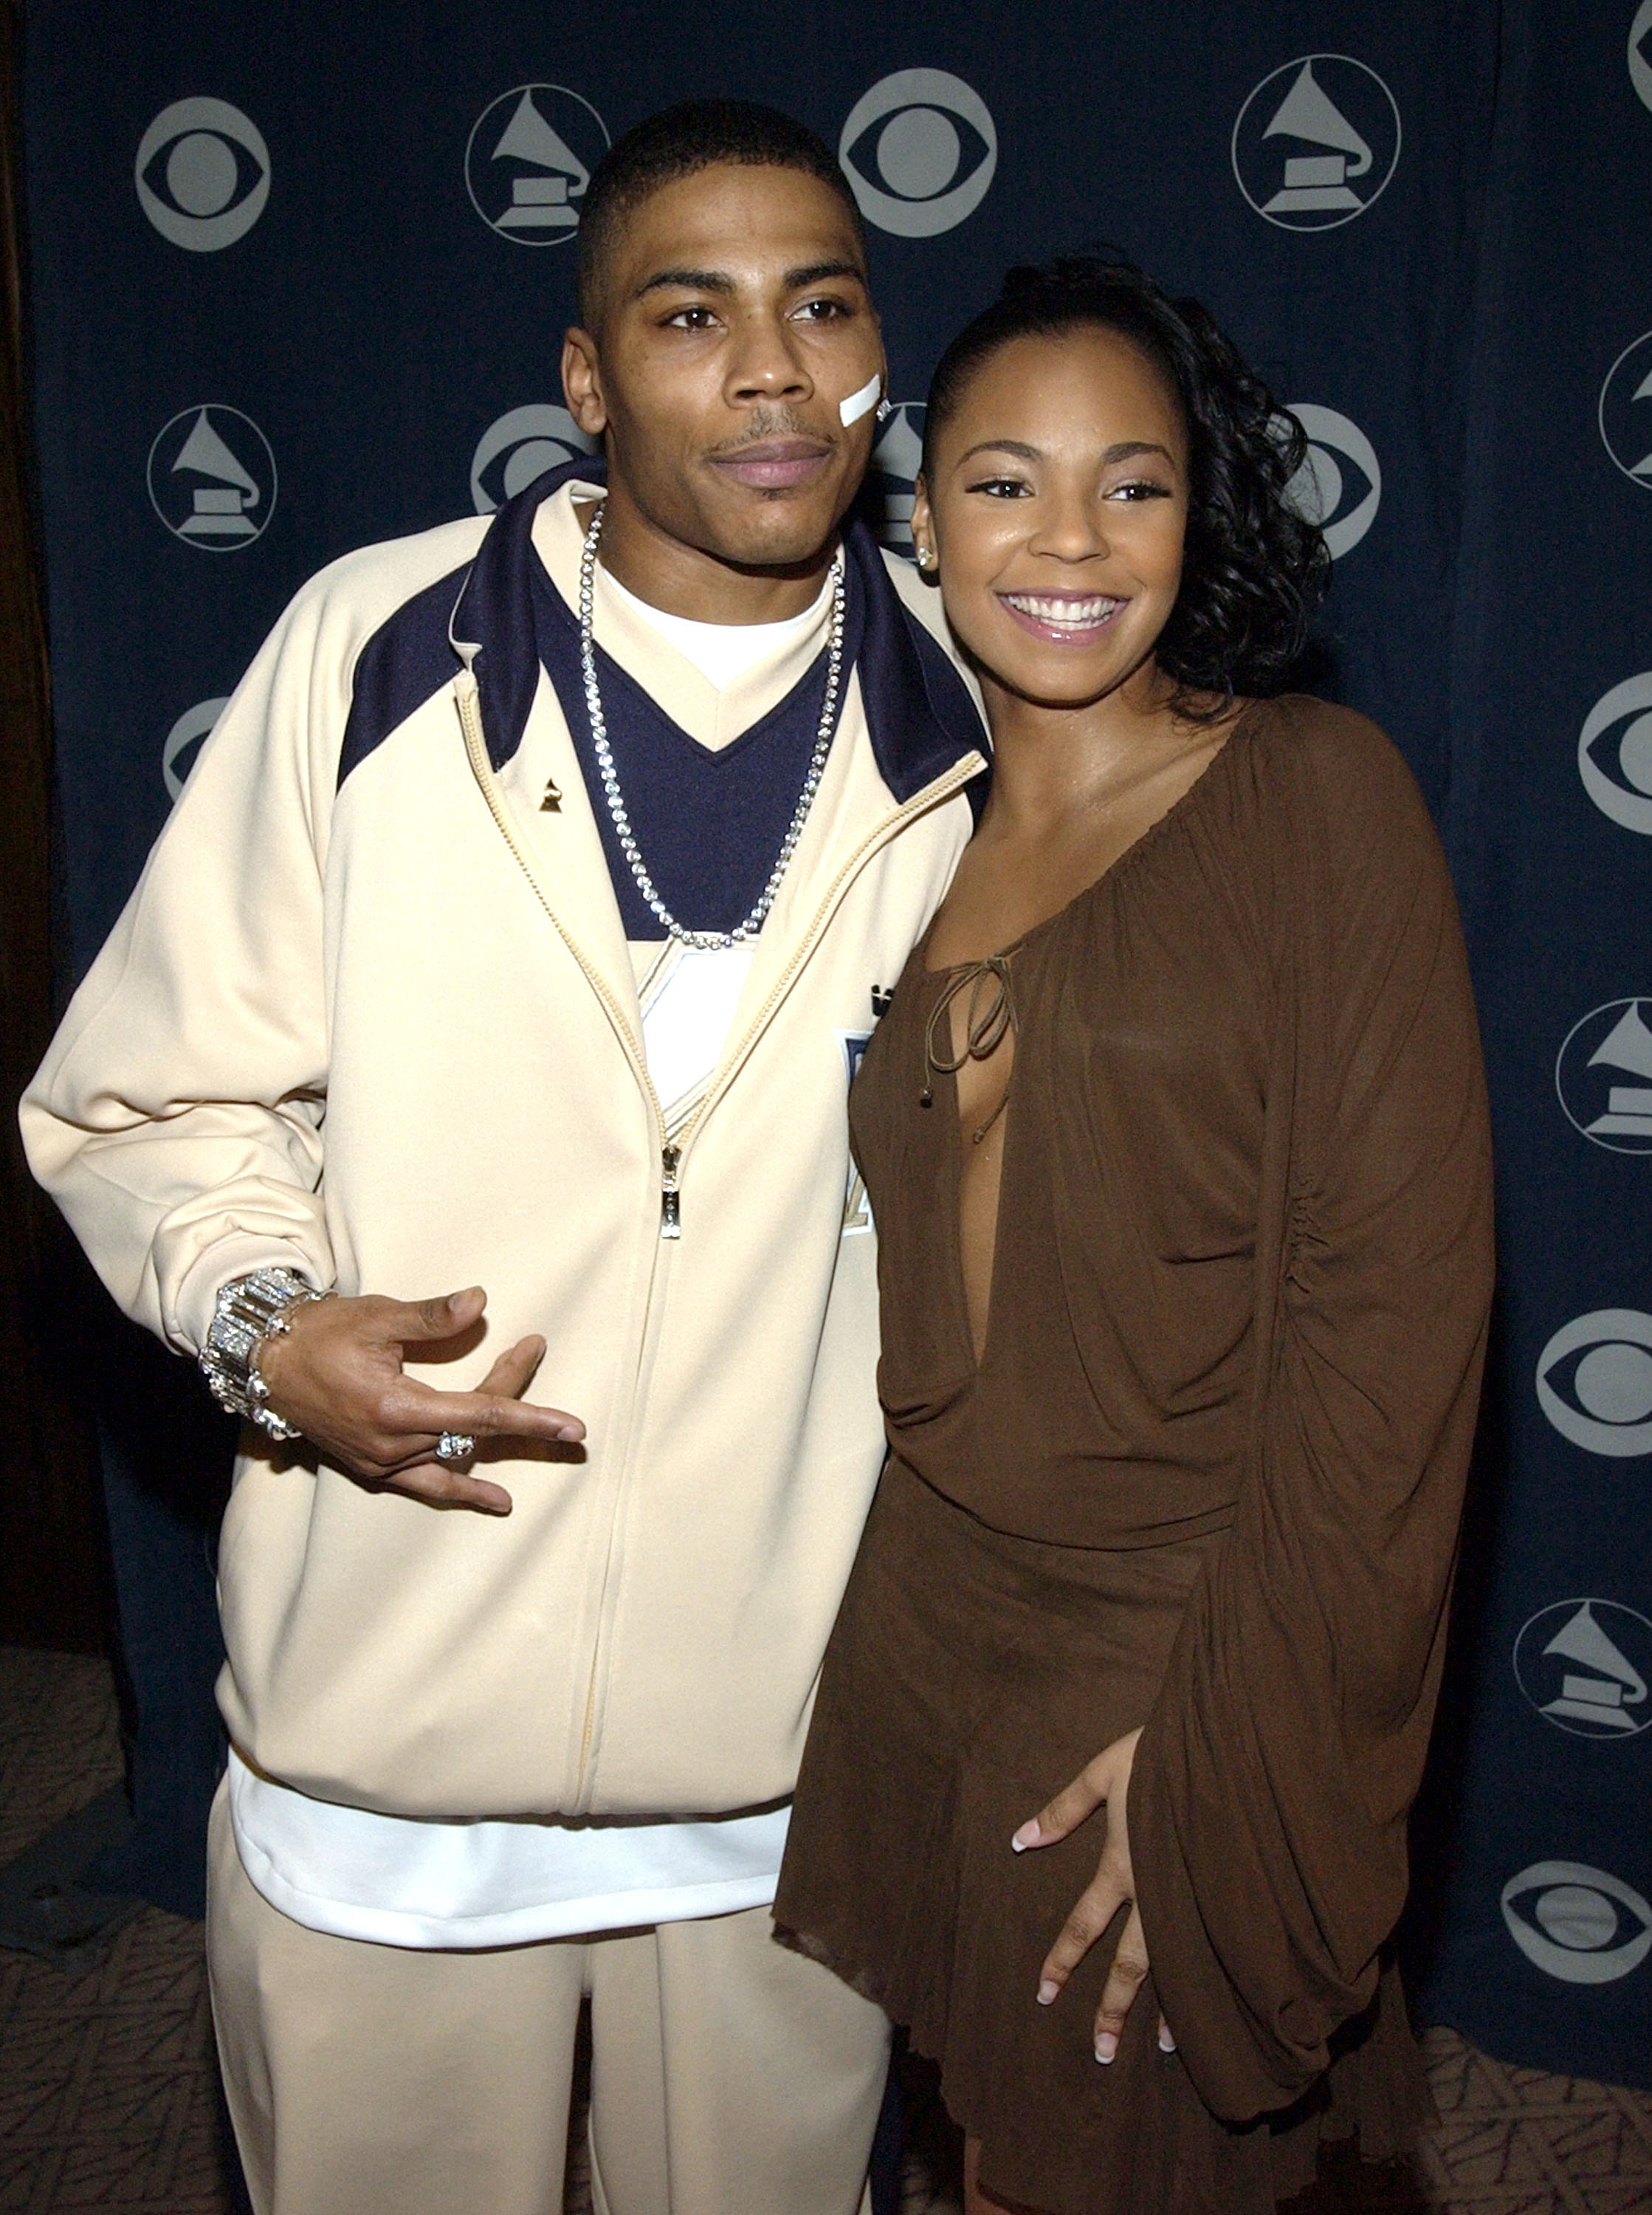 Nelly and Ashanti attend the 45th Grammy Award Nominations - Green Room on January 7, 2003. | Source: Getty Images